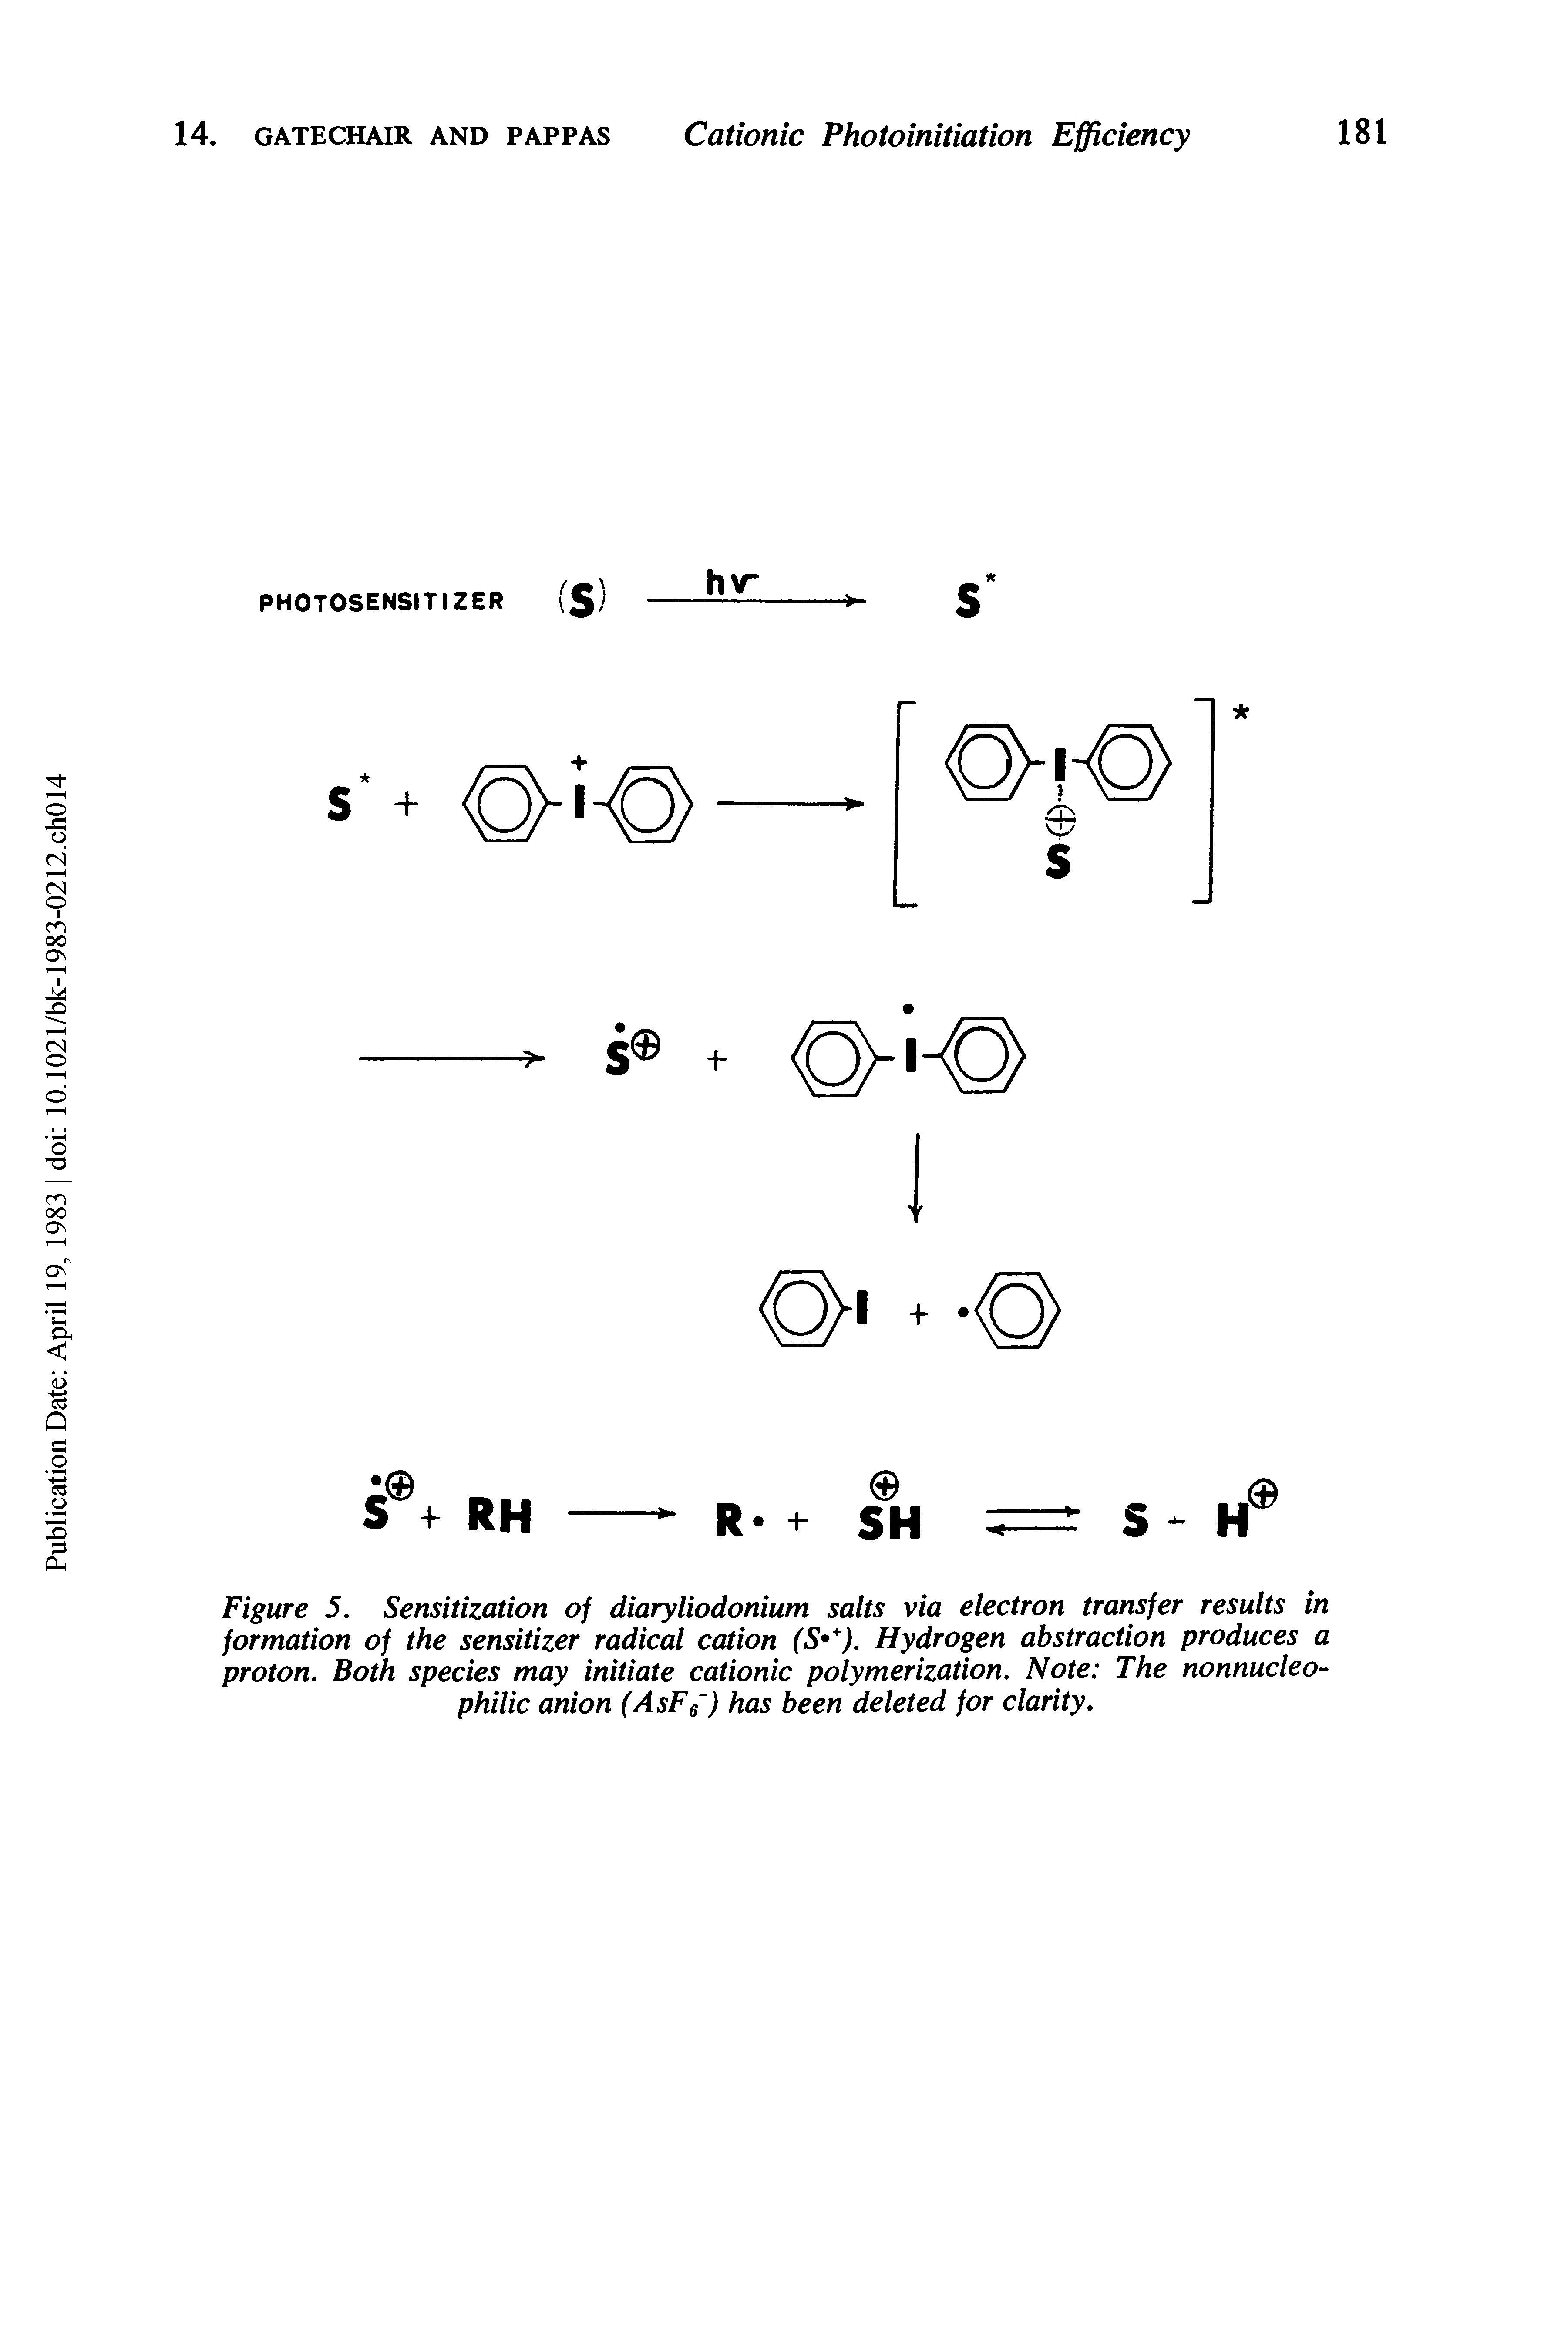 Figure 5. Sensitization of diaryliodonium salts via electron transfer results in formation of the sensitizer radical cation (S ). Hydrogen abstraction produces a proton. Both species may initiate cationic polymerization. Note The nonnucleo-philic anion (AsFo ) has been deleted for clarity.